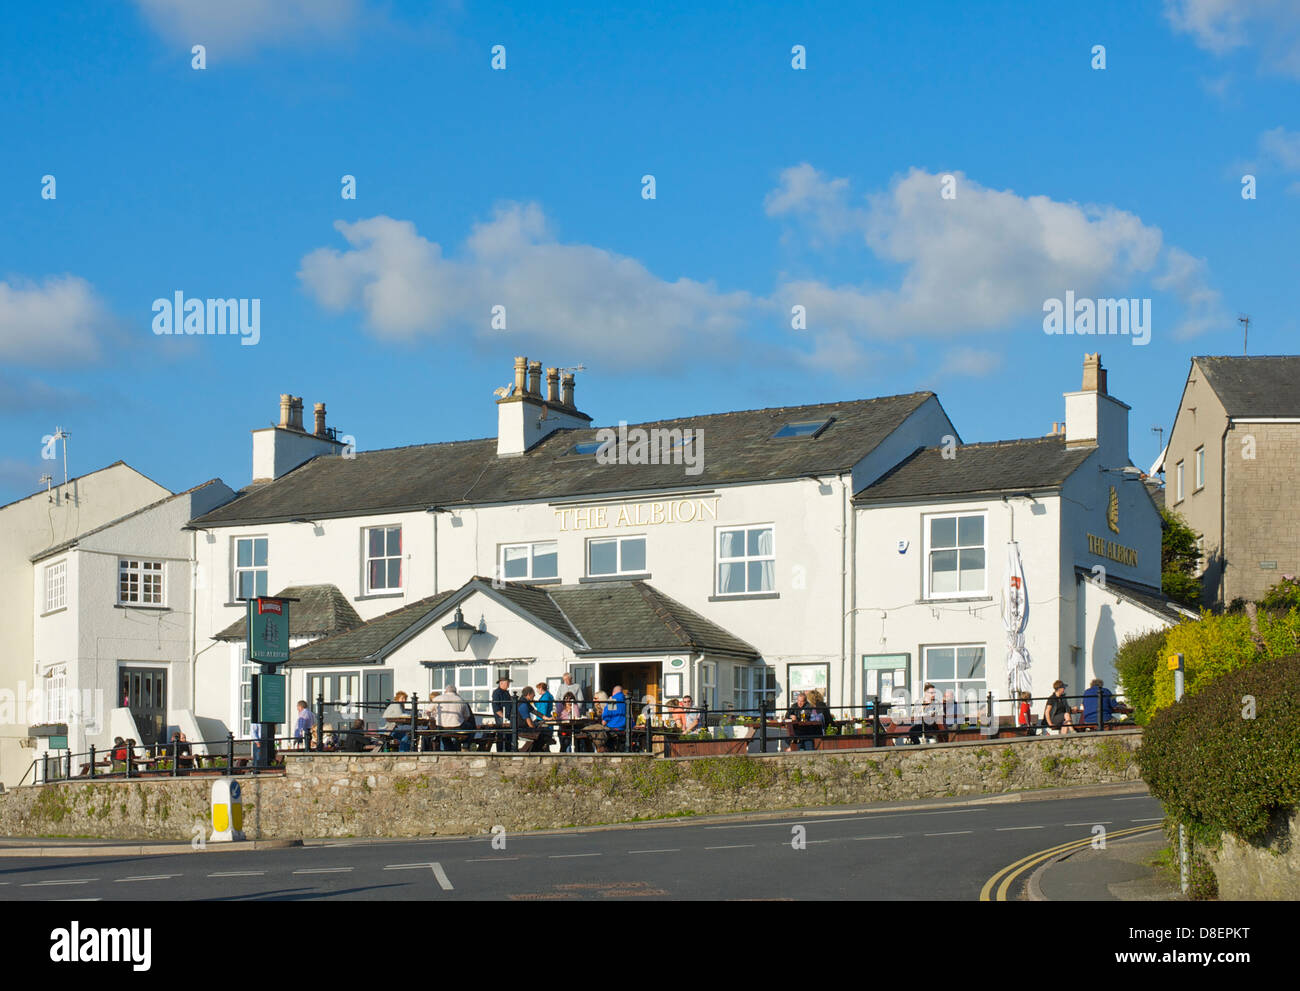 People drinking outside the Albion pub in Arnside, South Lakeland, Cumbria, England UK Stock Photo